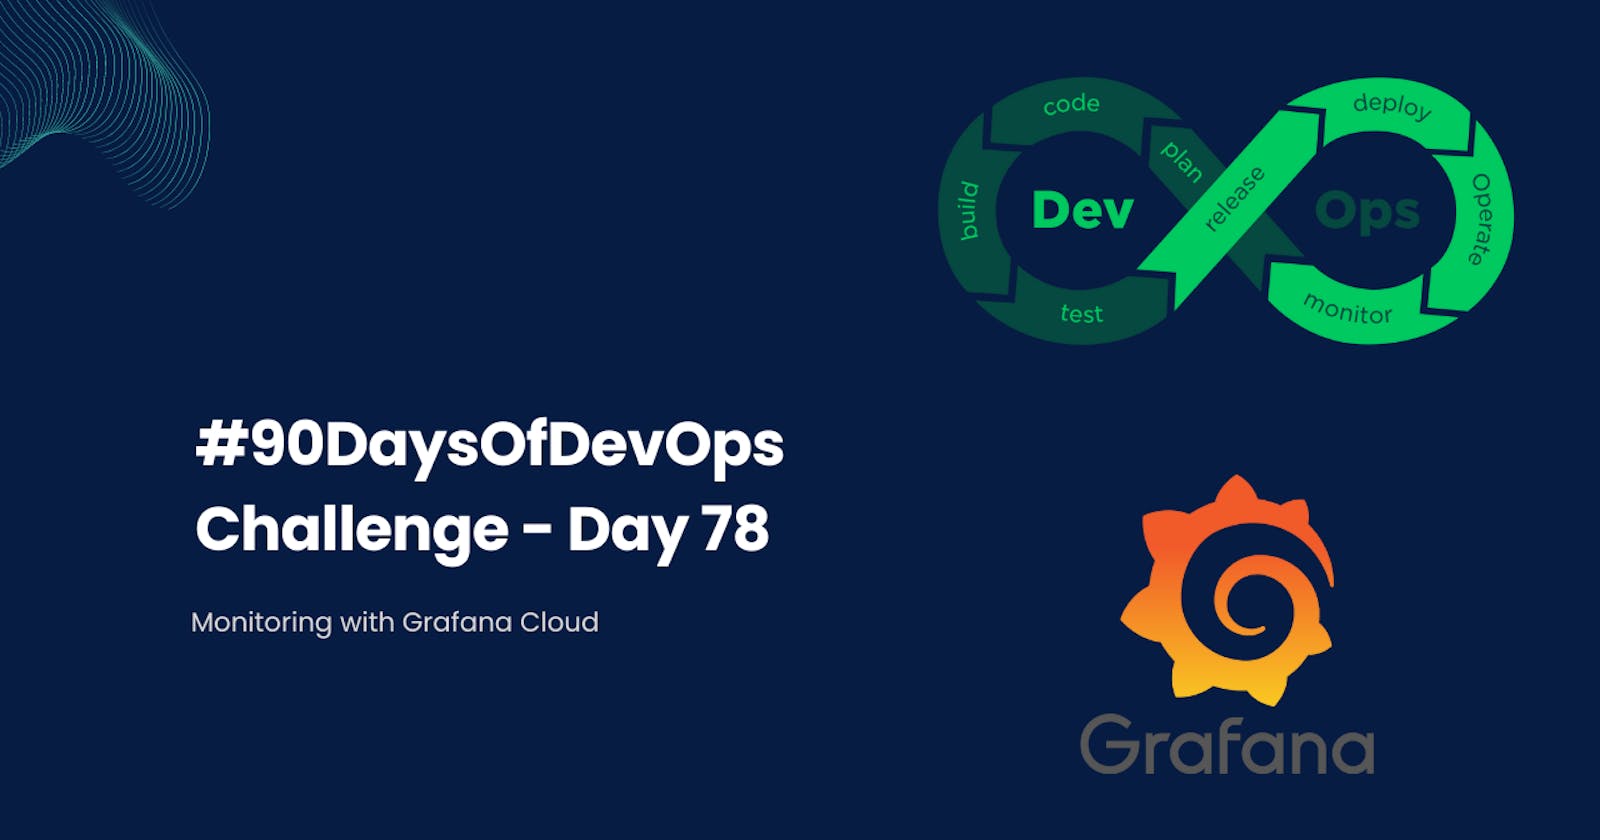 #90DaysOfDevOps Challenge - Day 78 - Monitoring with Grafana Cloud